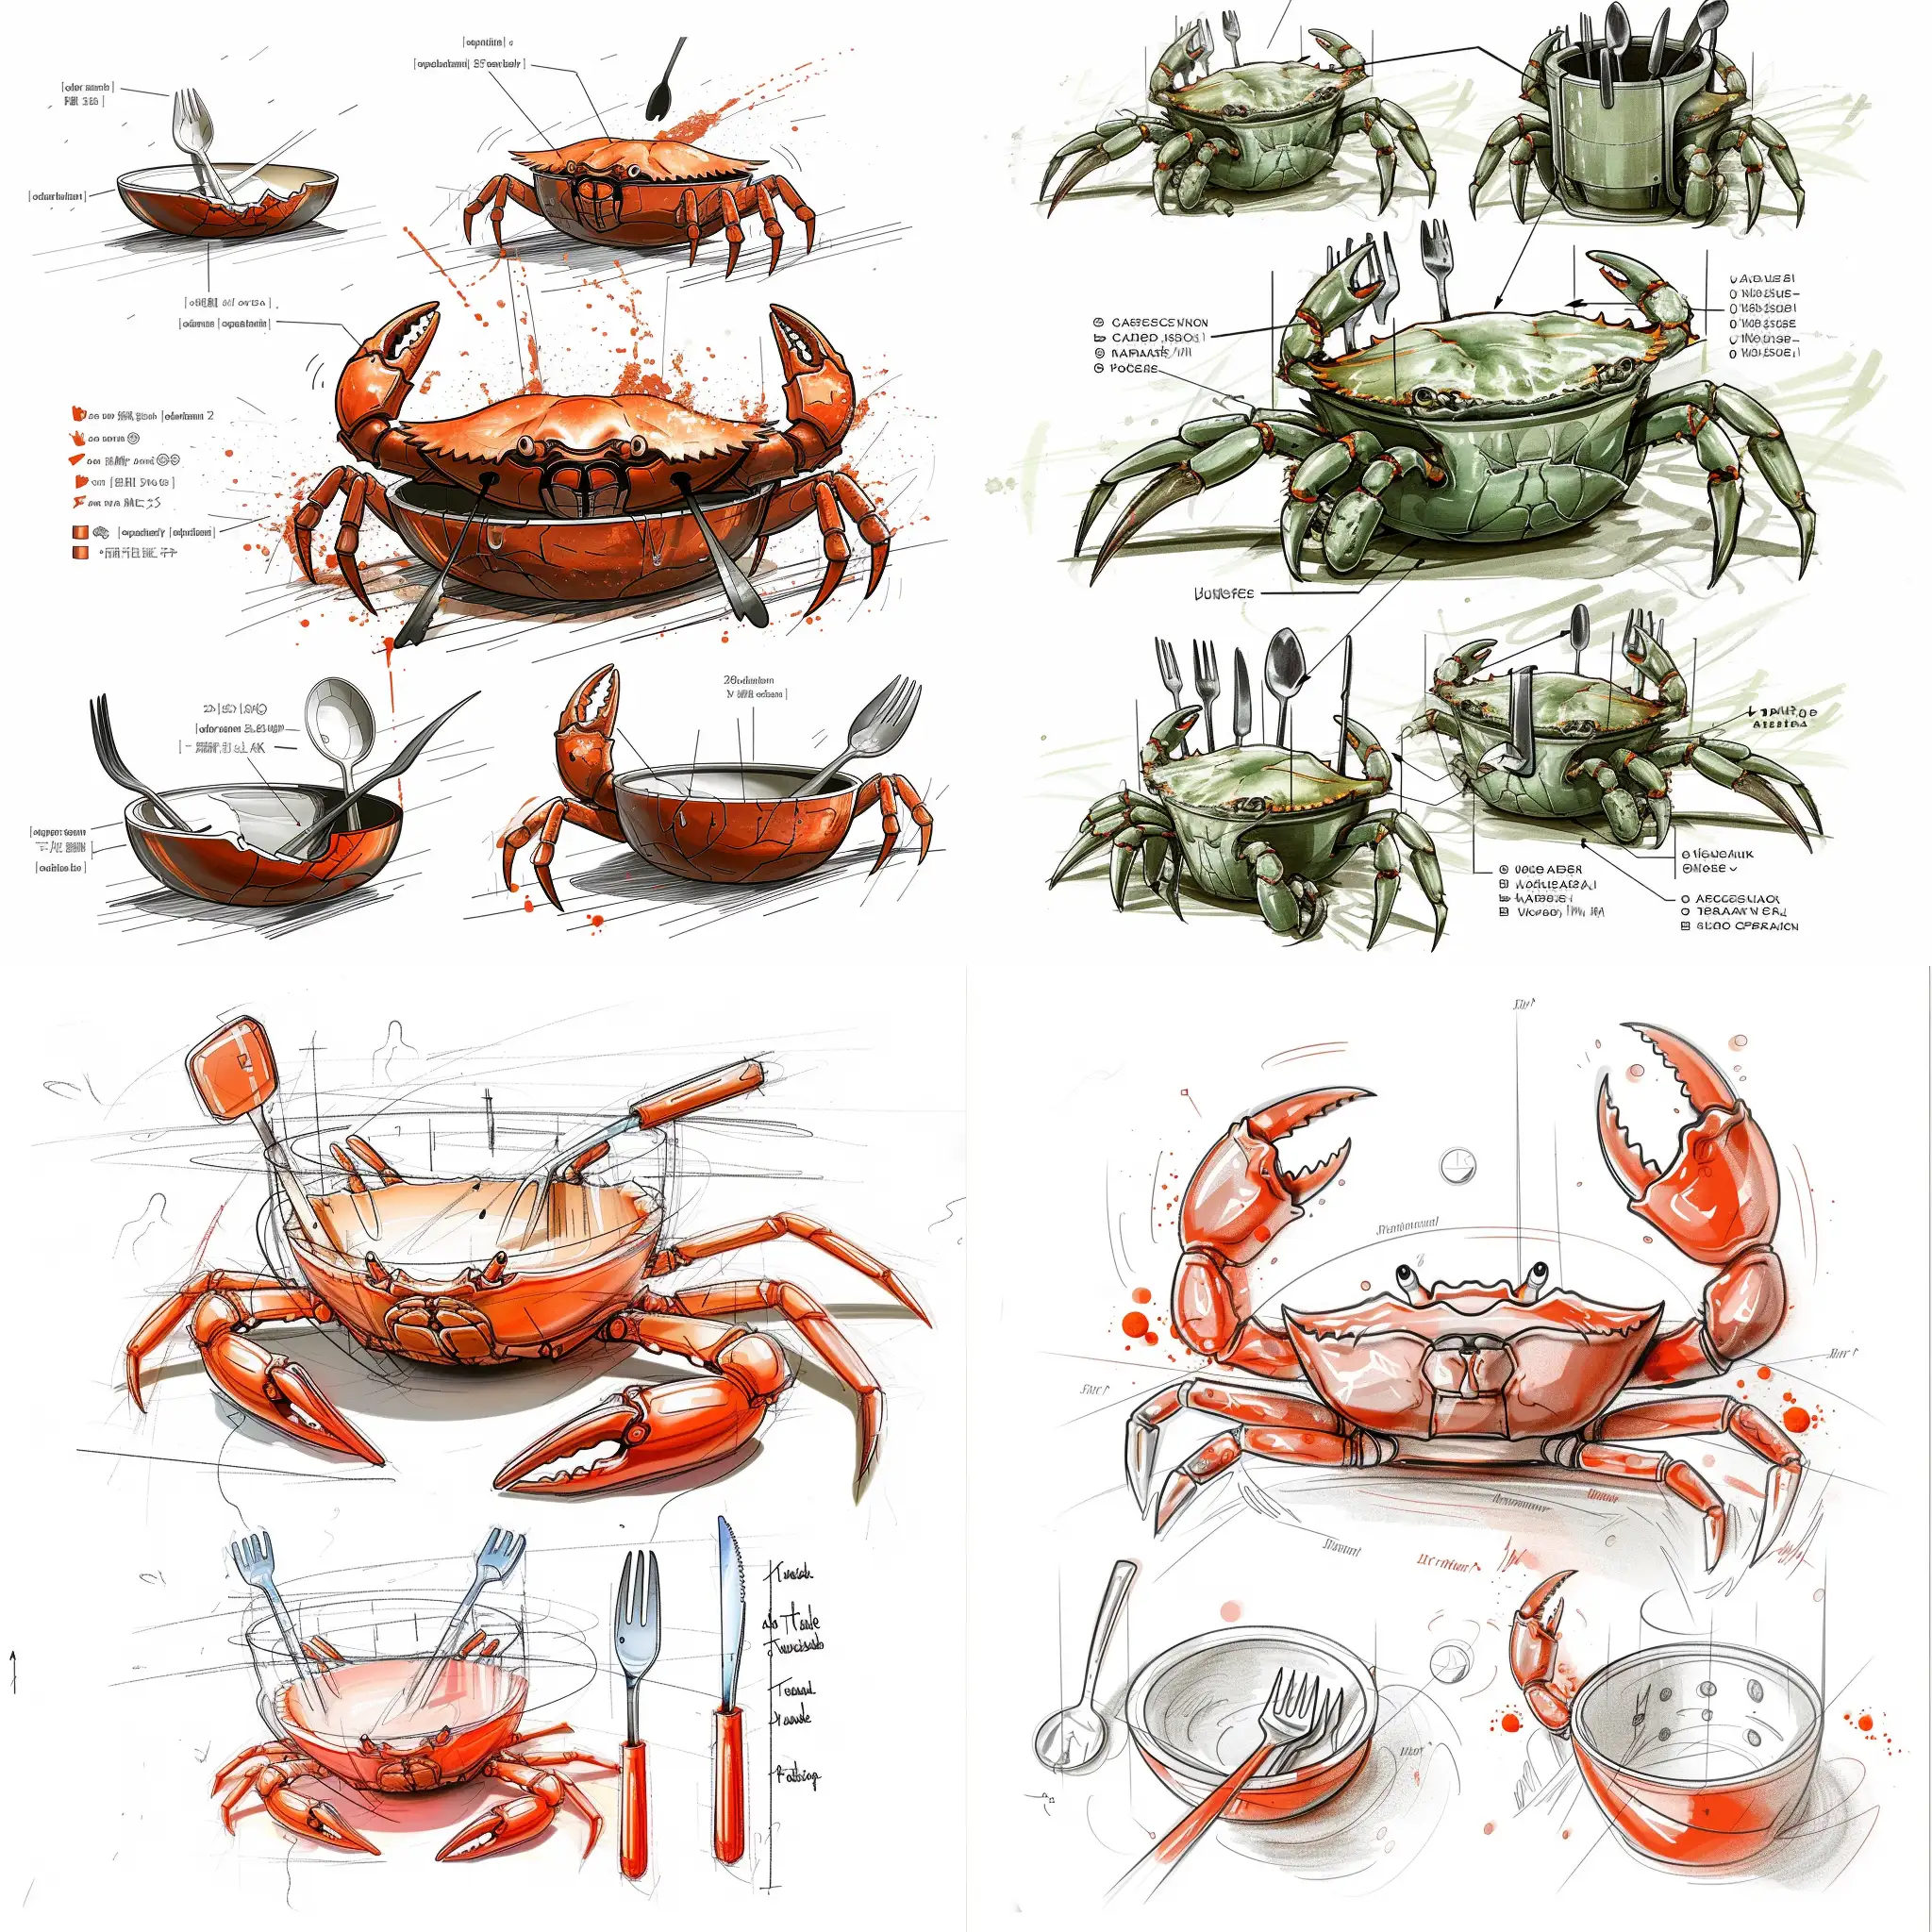 Childrens-Waterflood-Thermal-Preservation-Bowl-Design-Sketches-with-Crab-Claw-Handles